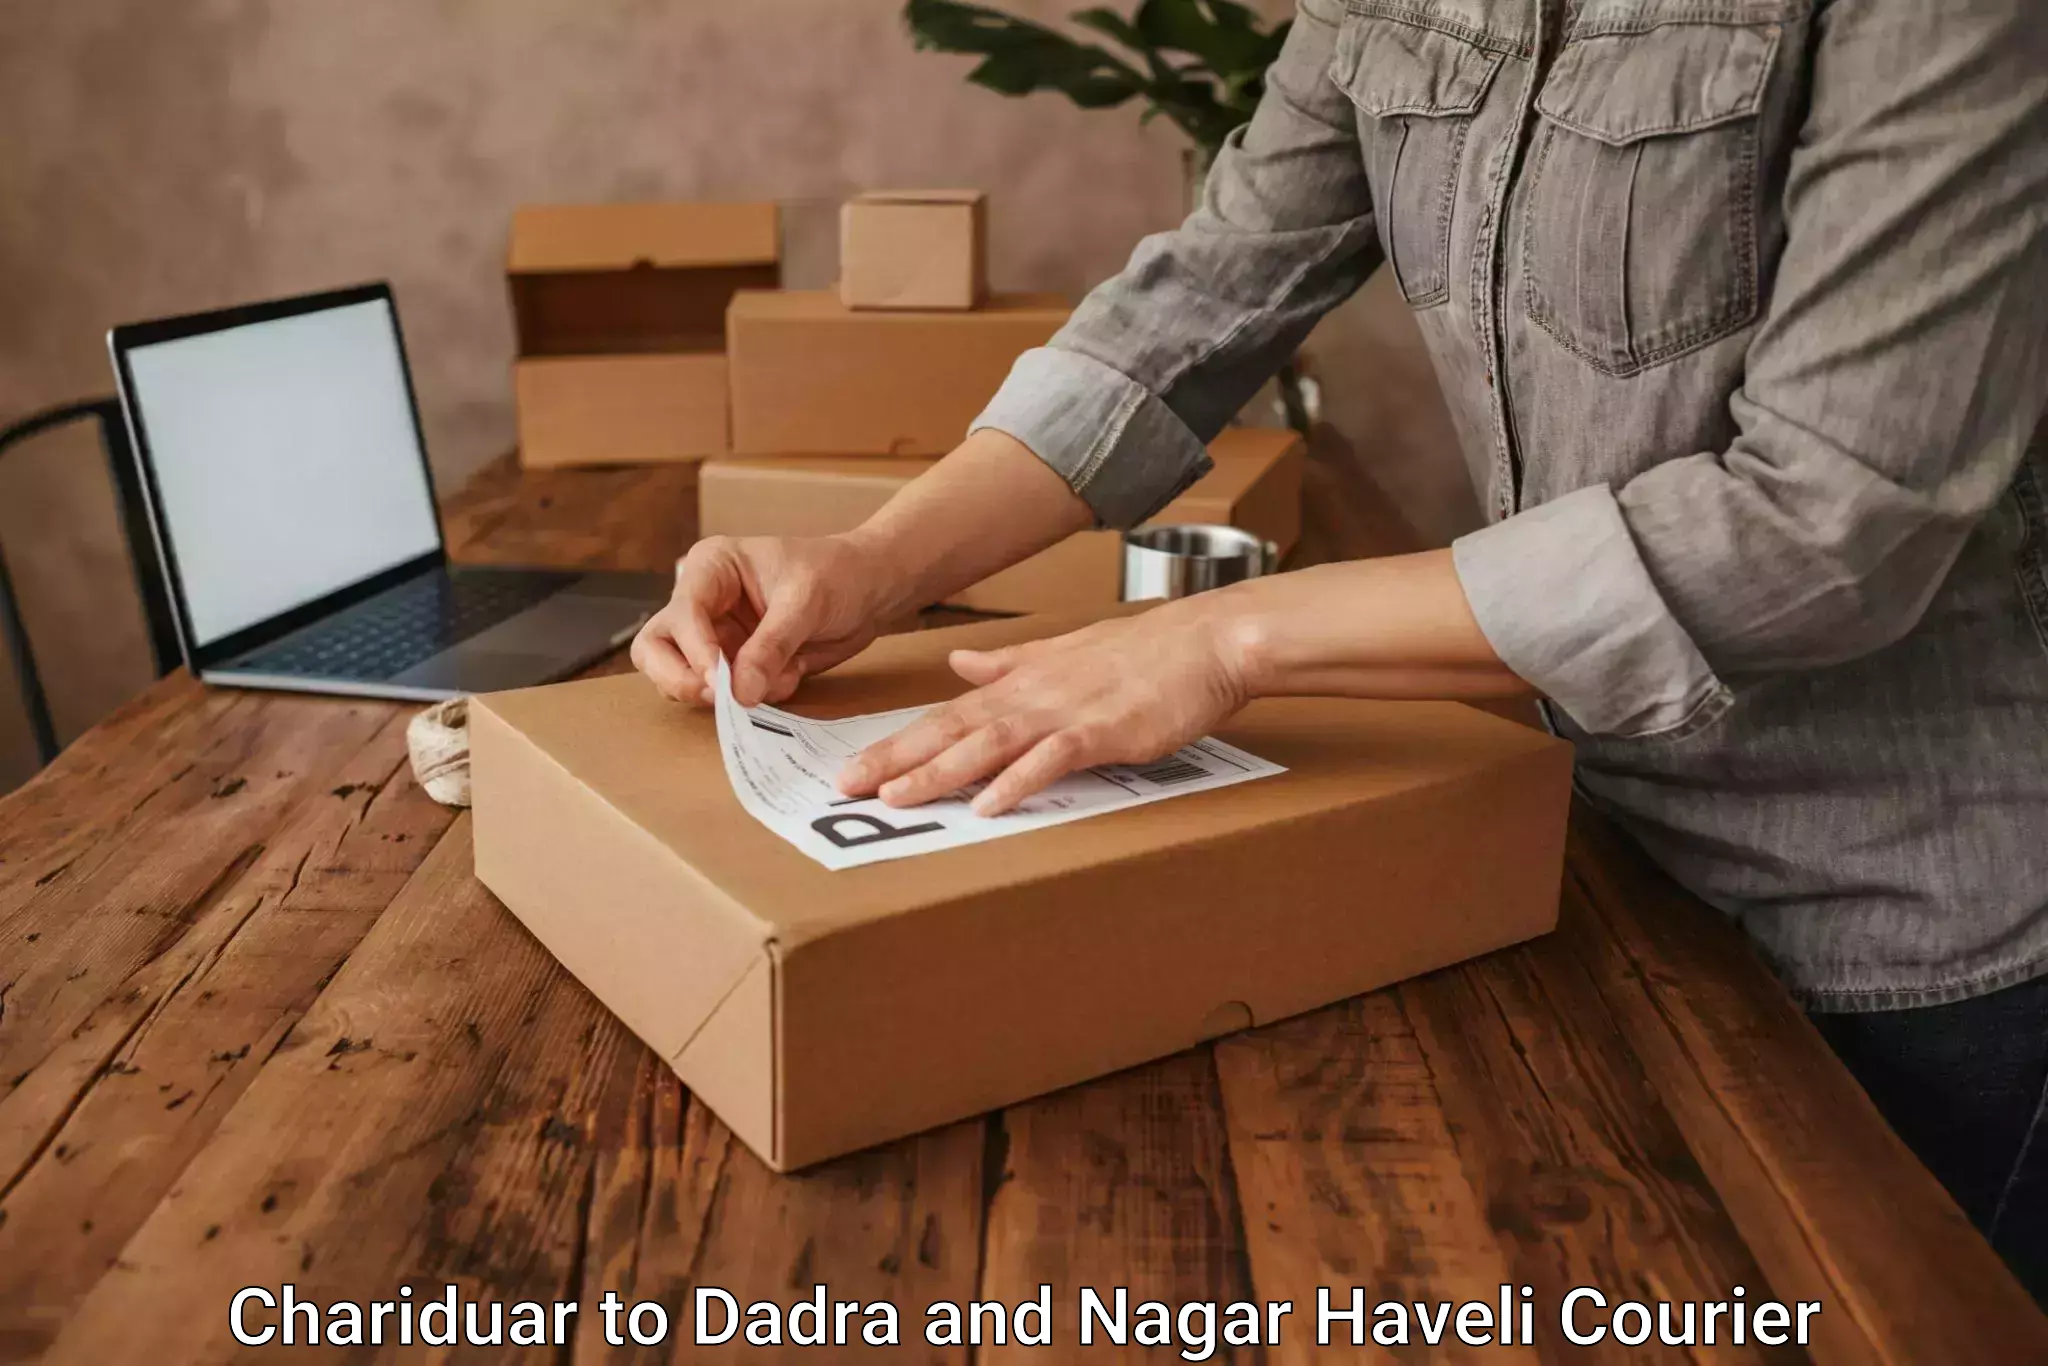 Round-the-clock parcel delivery Chariduar to Dadra and Nagar Haveli